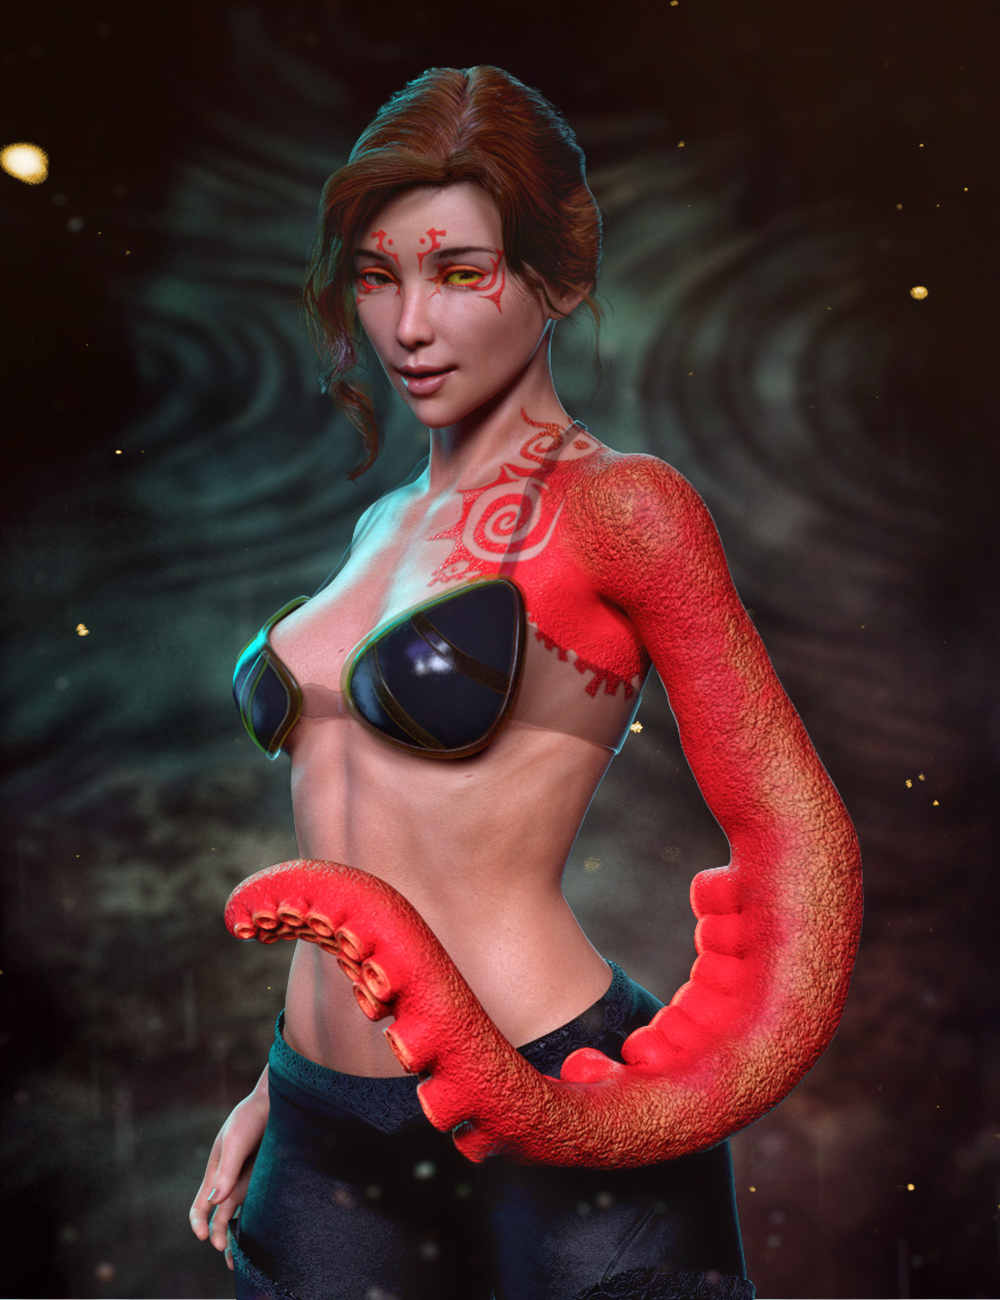 FPE Tentacle Arms Add-On for Genesis 8 and 8.1 Females